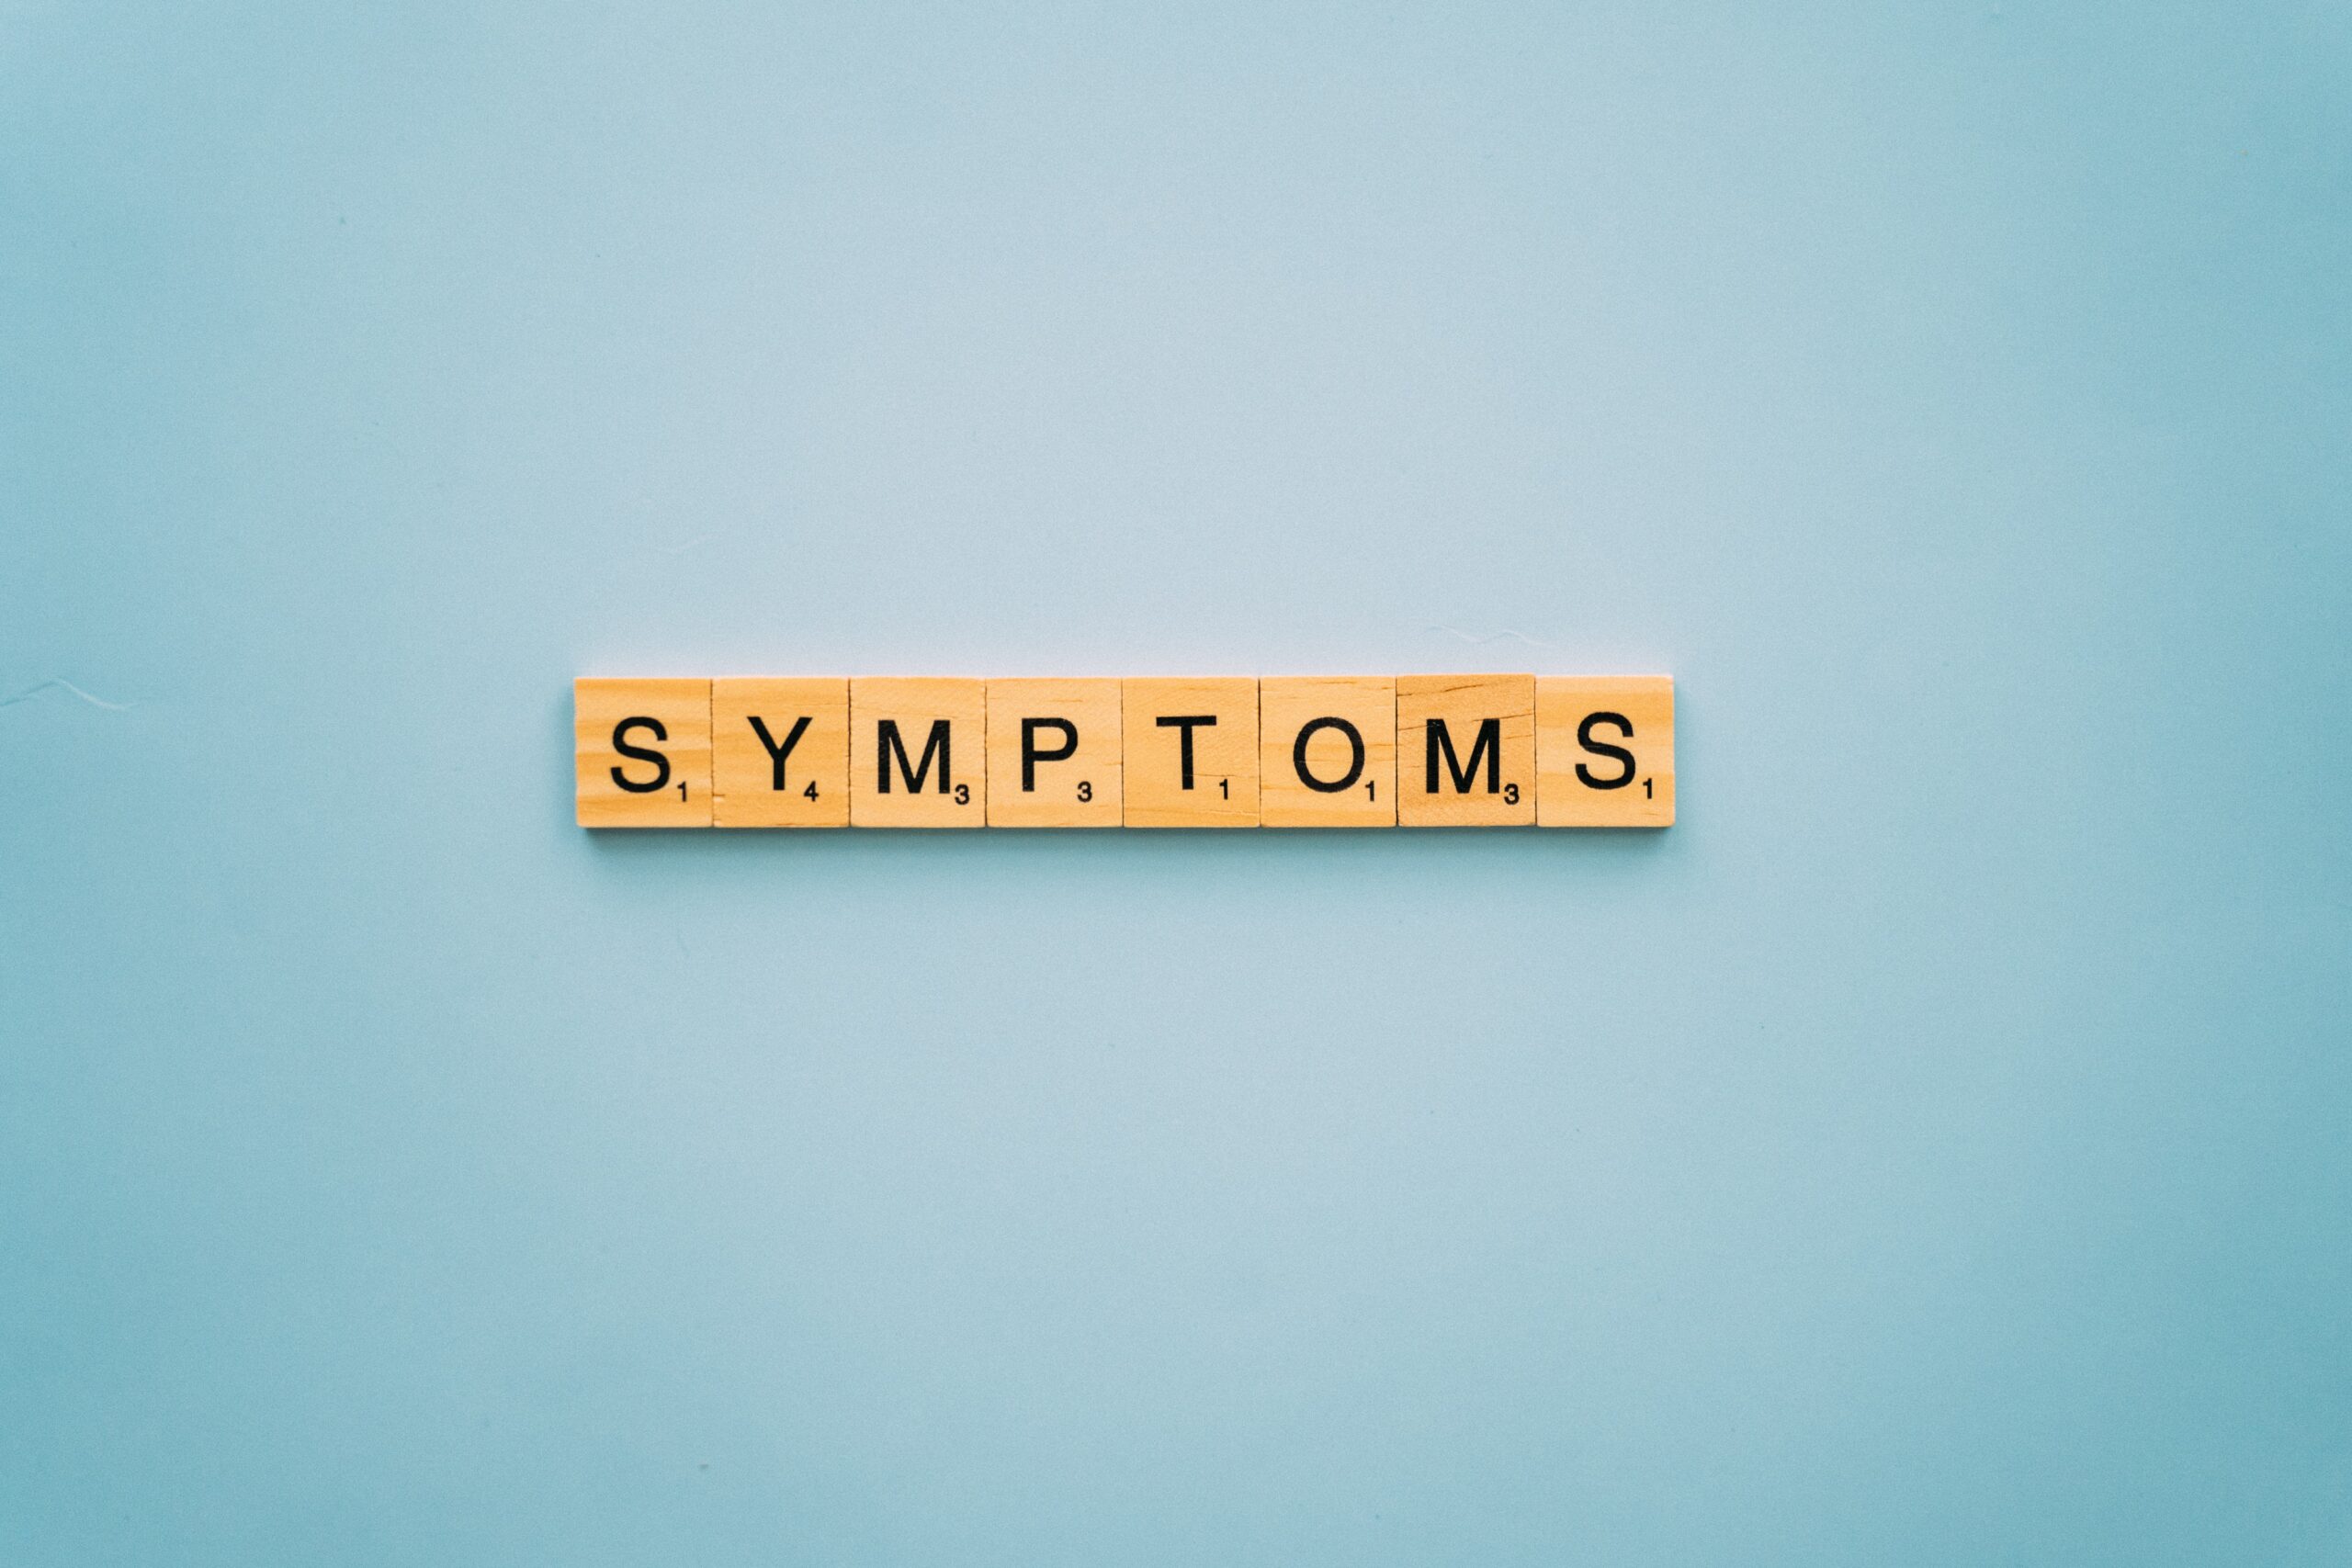 the word 'symptoms' spelled out in scrabble tiles.